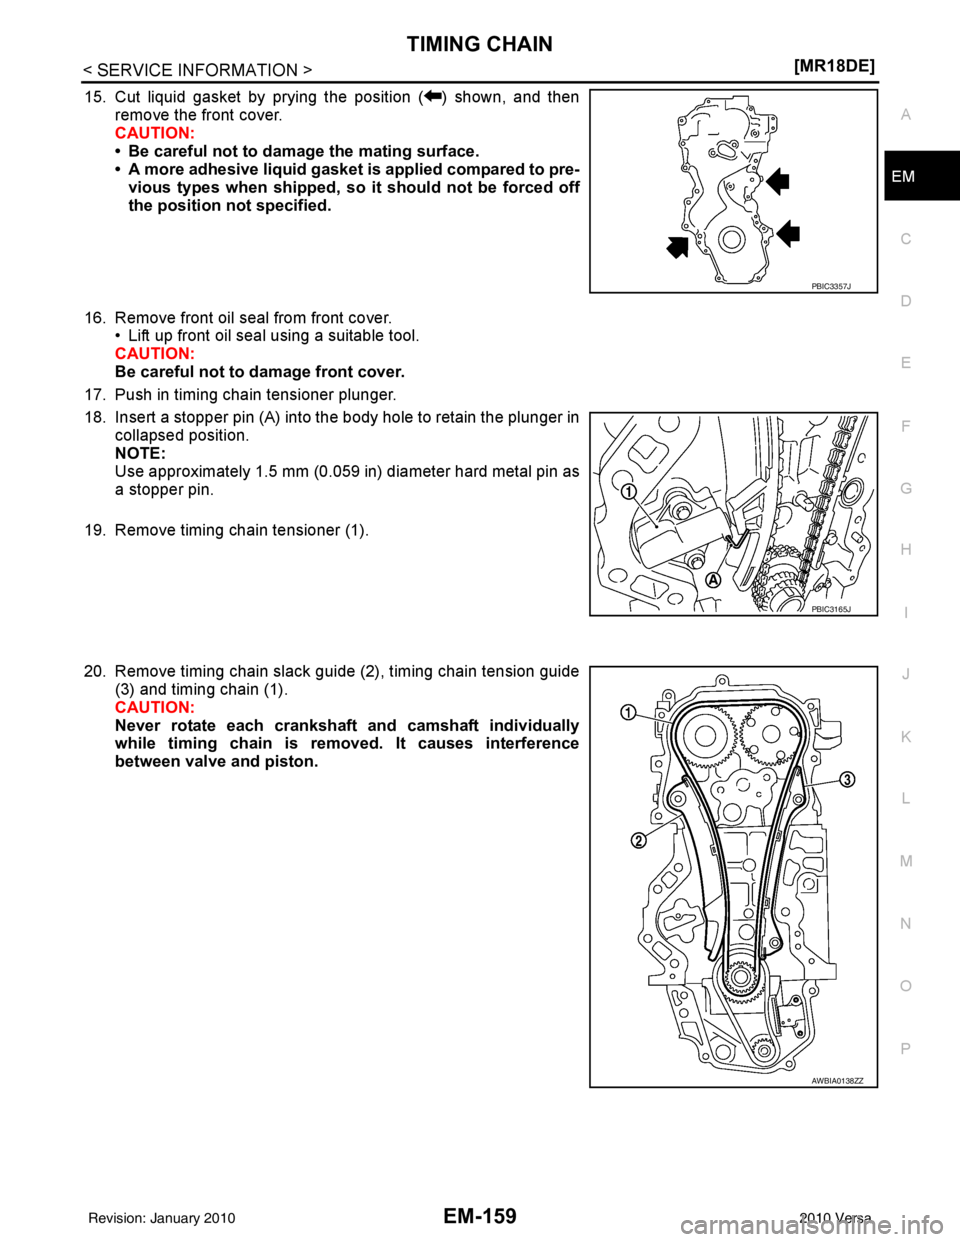 NISSAN LATIO 2010  Service Repair Manual TIMING CHAINEM-159
< SERVICE INFORMATION > [MR18DE]
C
D
E
F
G H
I
J
K L
M A
EM
NP
O
15. Cut liquid gasket by prying the position ( ) shown, and then
remove the front cover.
CAUTION:
• Be careful not